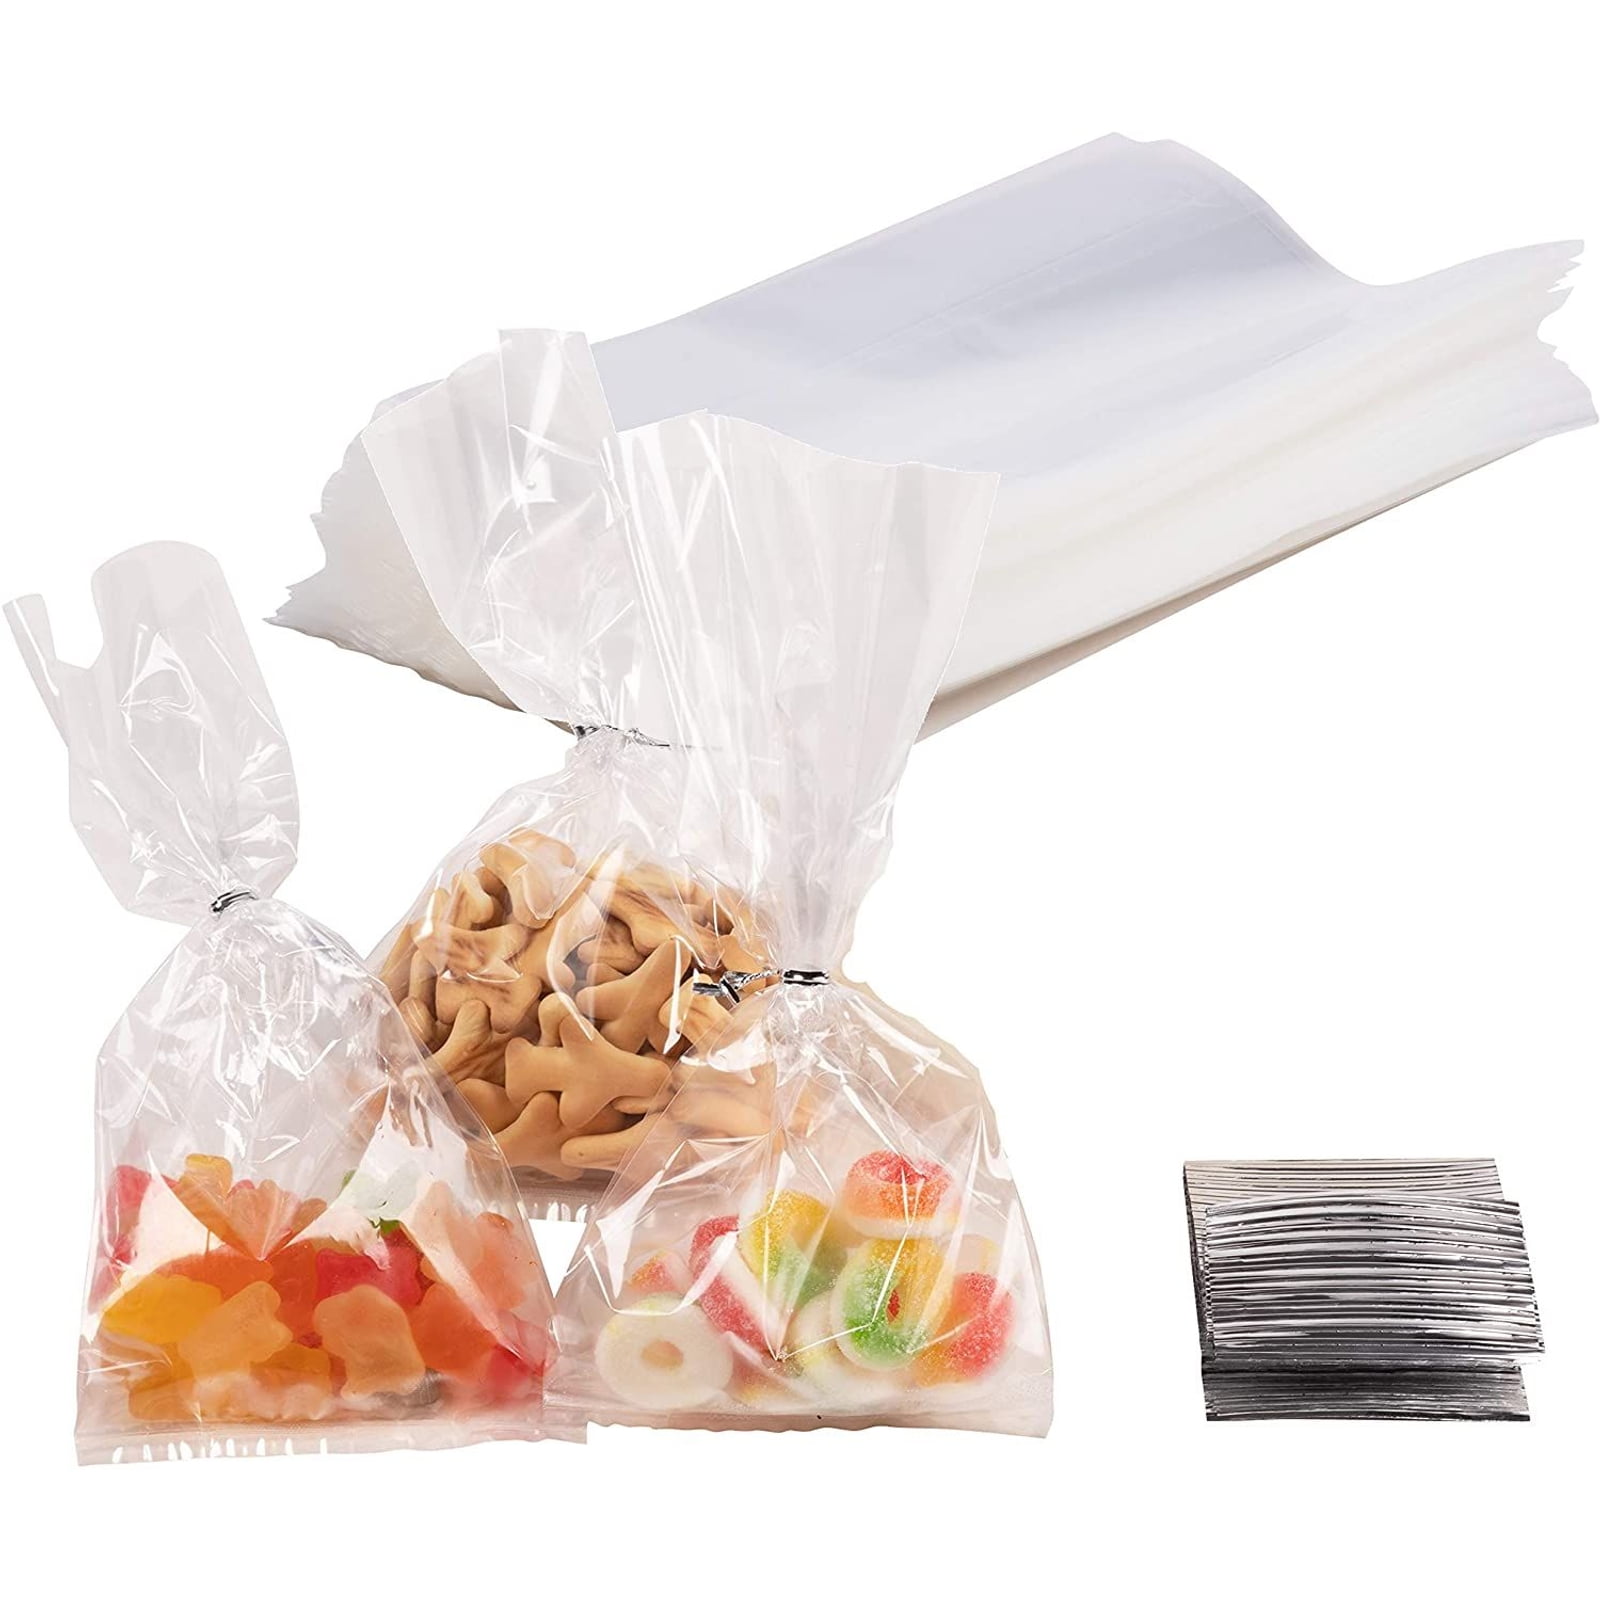 Candies,Dessert，Popcorn Cookies 200 PCS Clear Bags，Party Favor Bags with 200 Twist Ties 5 Mix Colors Good for Bakery 2 x 10 